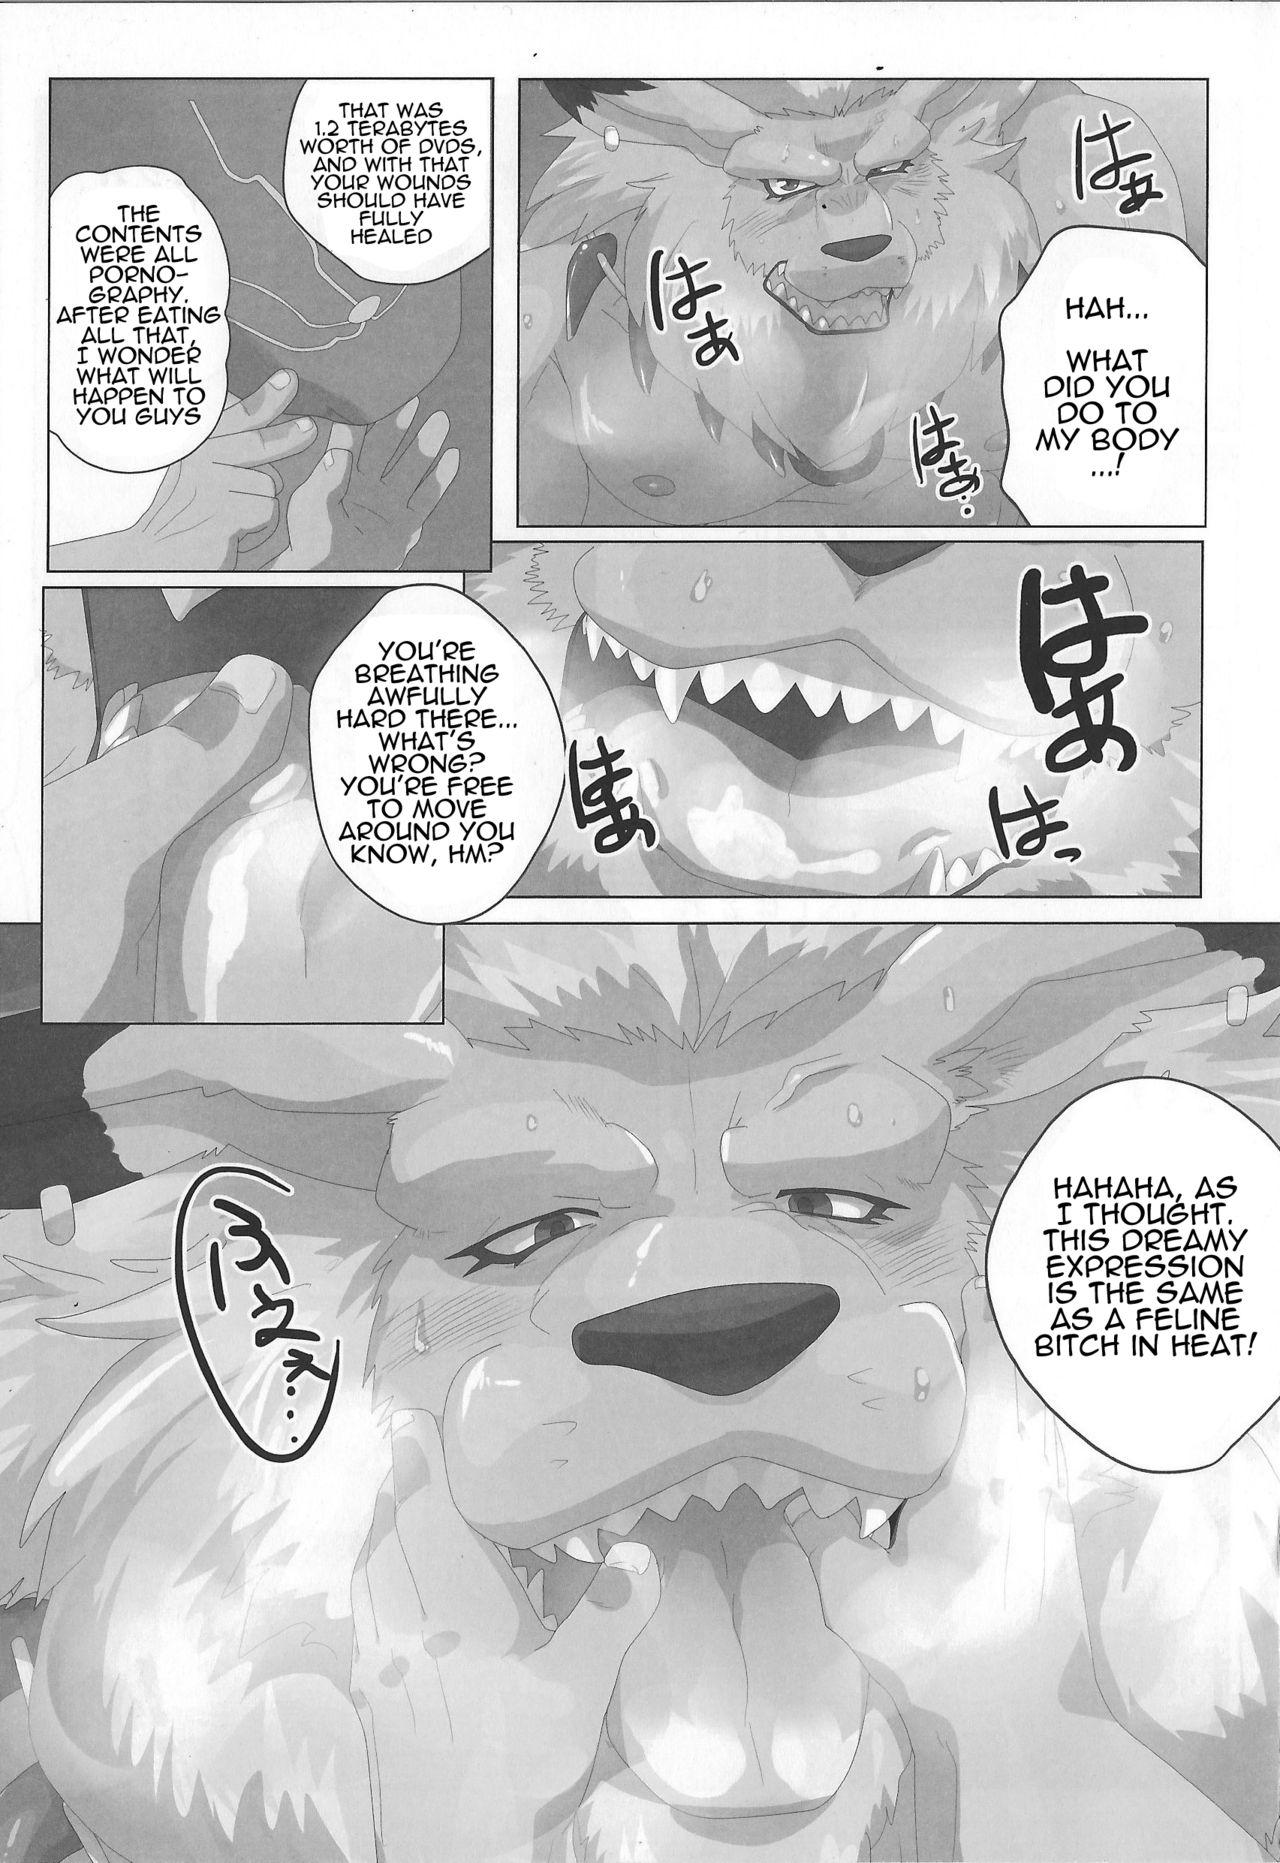 Handjobs [Debirobu] For the Lion-Man Type Electric Life Form to Overturn Fate - Leomon Doujin [ENG] - Digimon Free Porn Amateur - Page 9